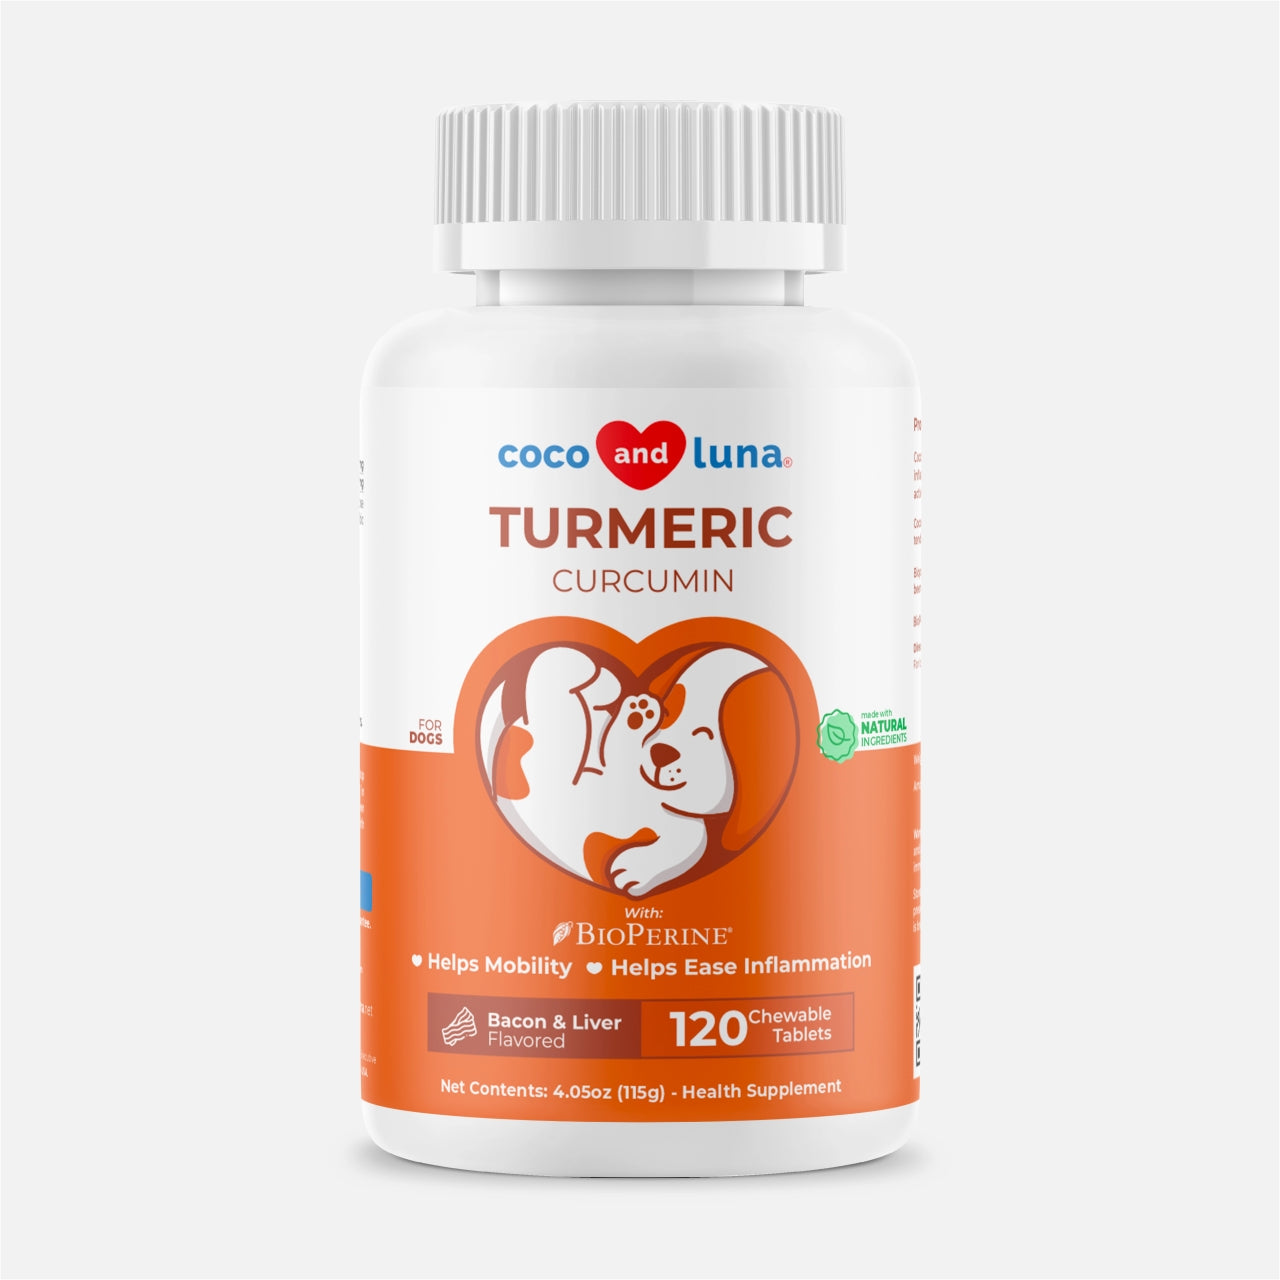 Turmeric for Dogs - 120 Chewable Tablets - Coco and Luna